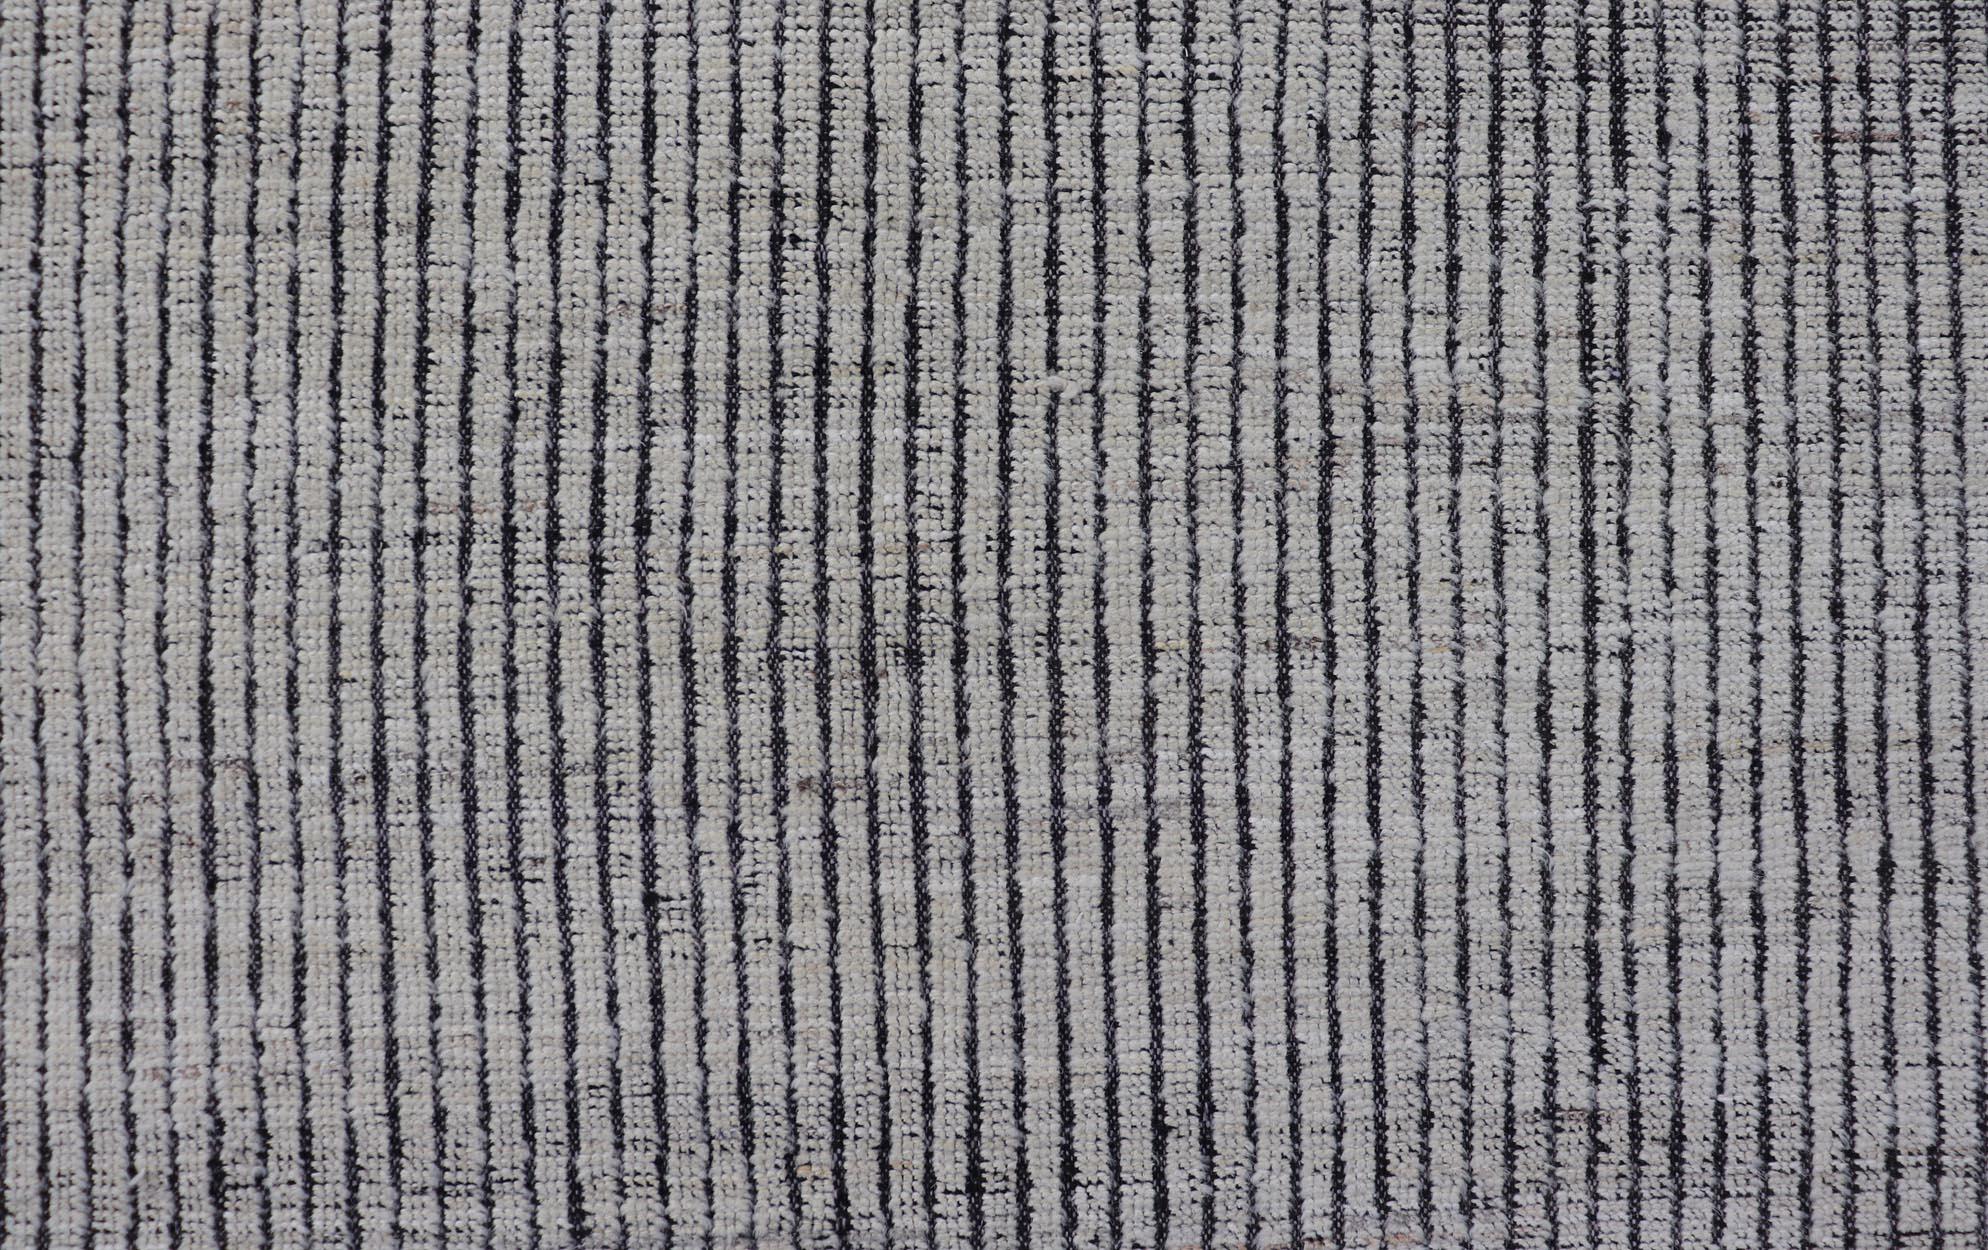 Modern Gallery Rug in White and Black background and Distressed Texture

Modern Casual Wool Hand Knotted Black and White Gallery Runner. Keivan Woven Arts: rug / AFG-58431, country of origin / type: Afghanistan / Piled, 21-st Century
Measures: 5'2 x